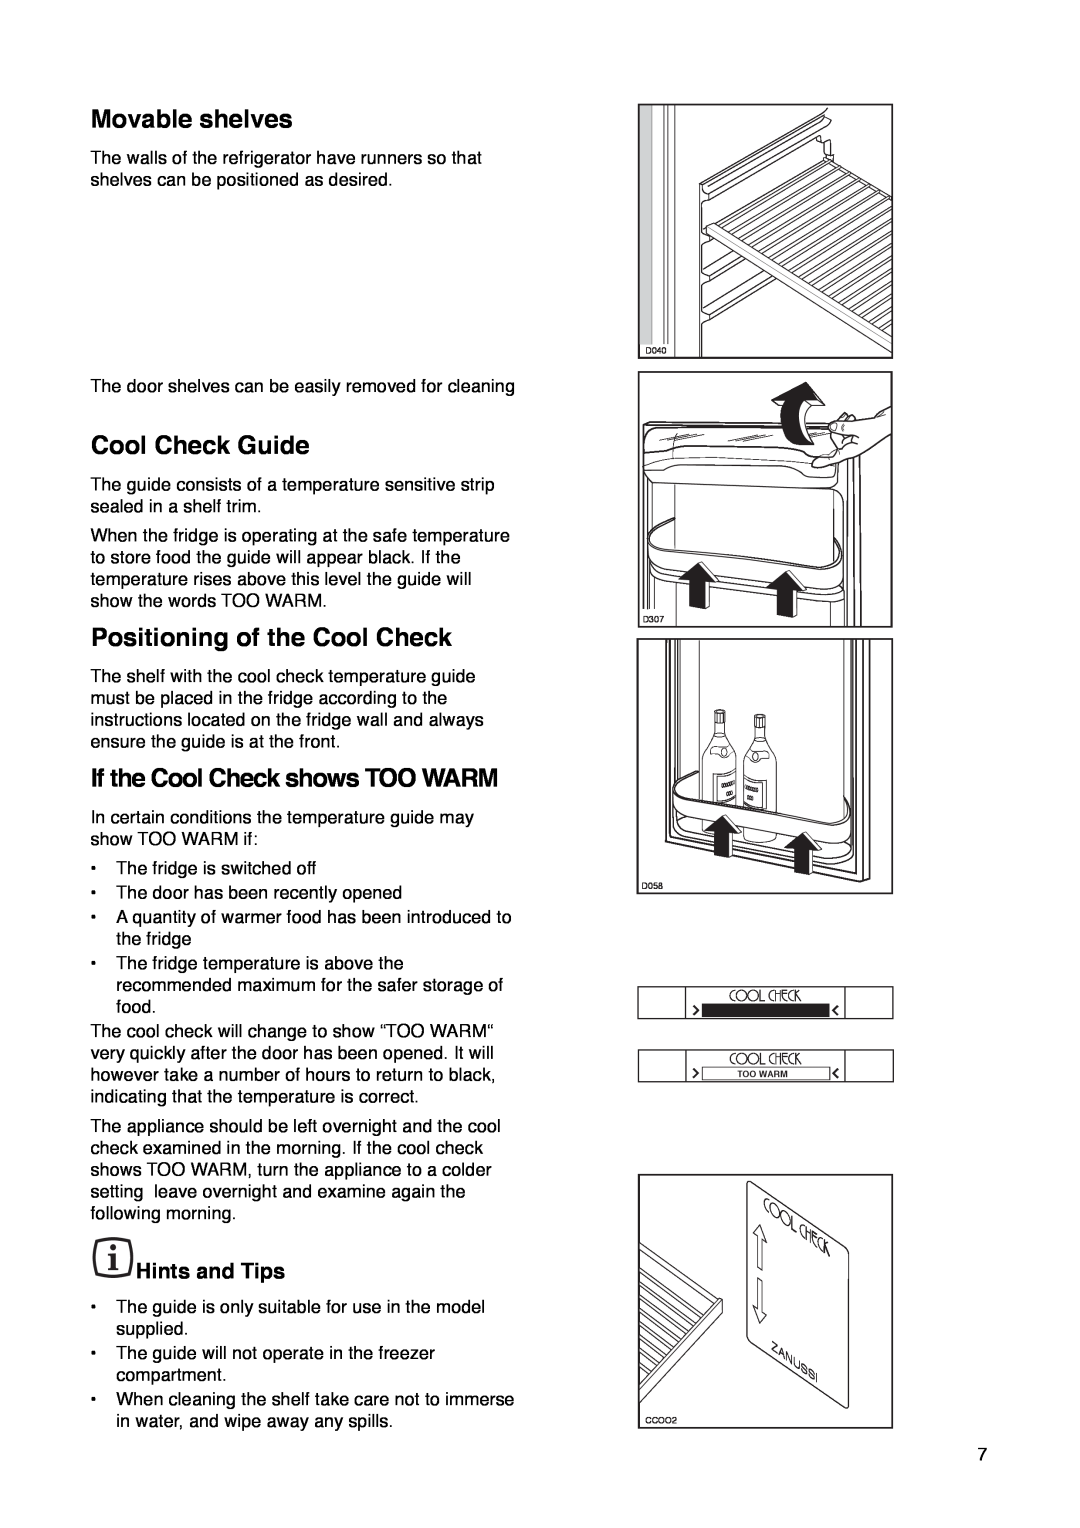 Zanussi ZD 50/33 R Movable shelves, Cool Check Guide, Positioning of the Cool Check, If the Cool Check shows TOO WARM 